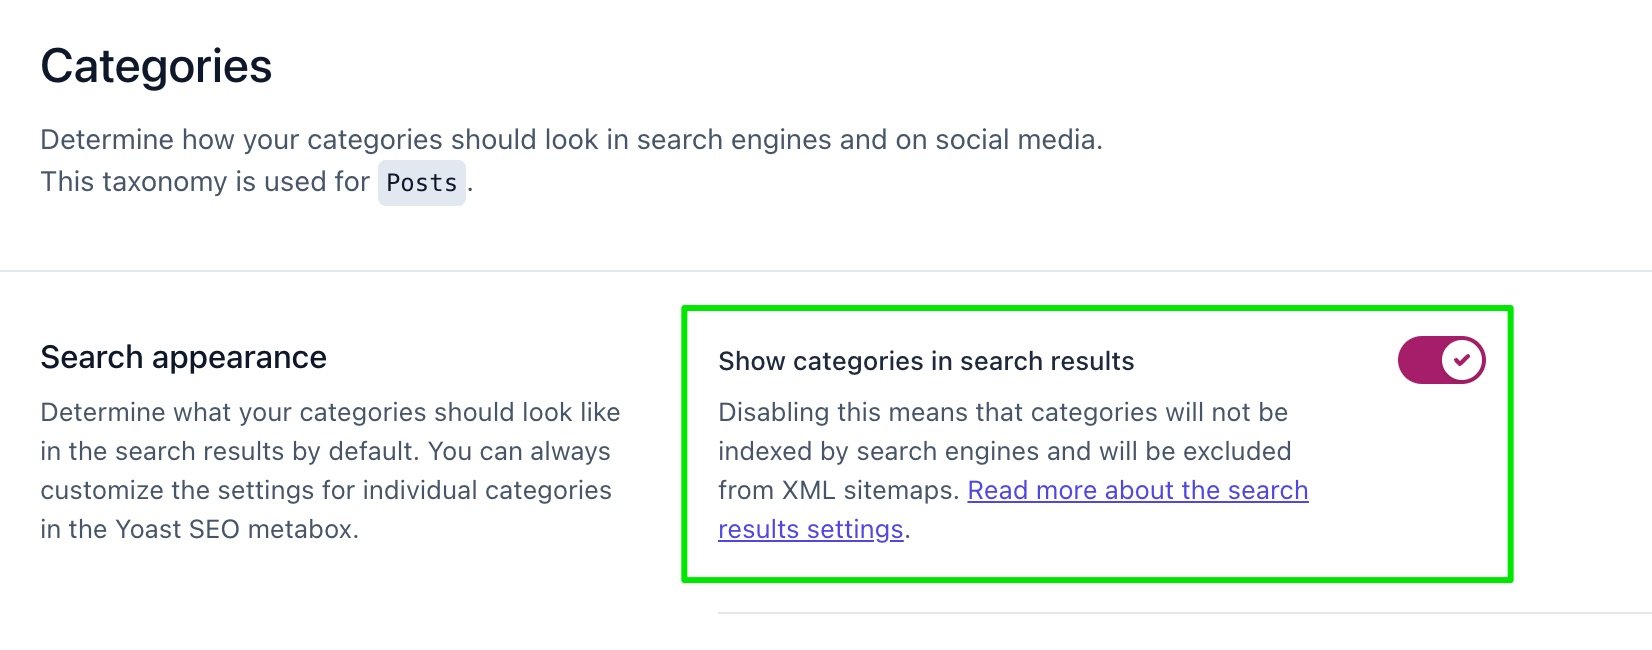 Screenshot of the "Show categories in search results" toggle in the Yoast SEO settings.